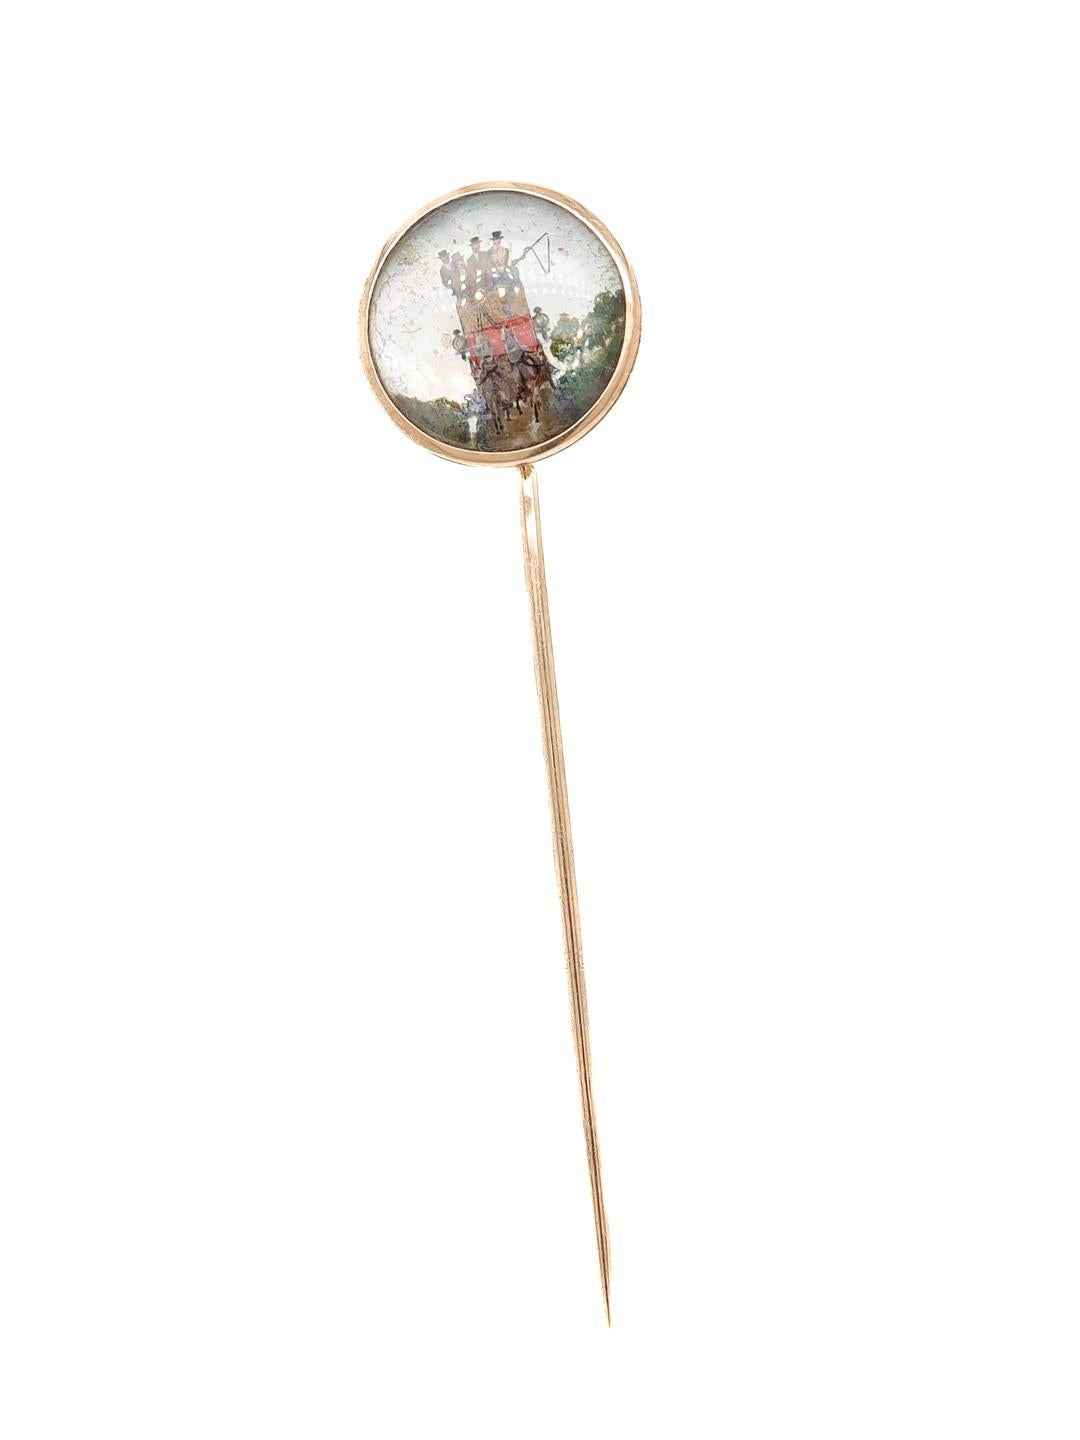 Women's or Men's Large Antique Signed 14k Gold Essex Crystal Stickpin of a Stagecoach or Carriage For Sale